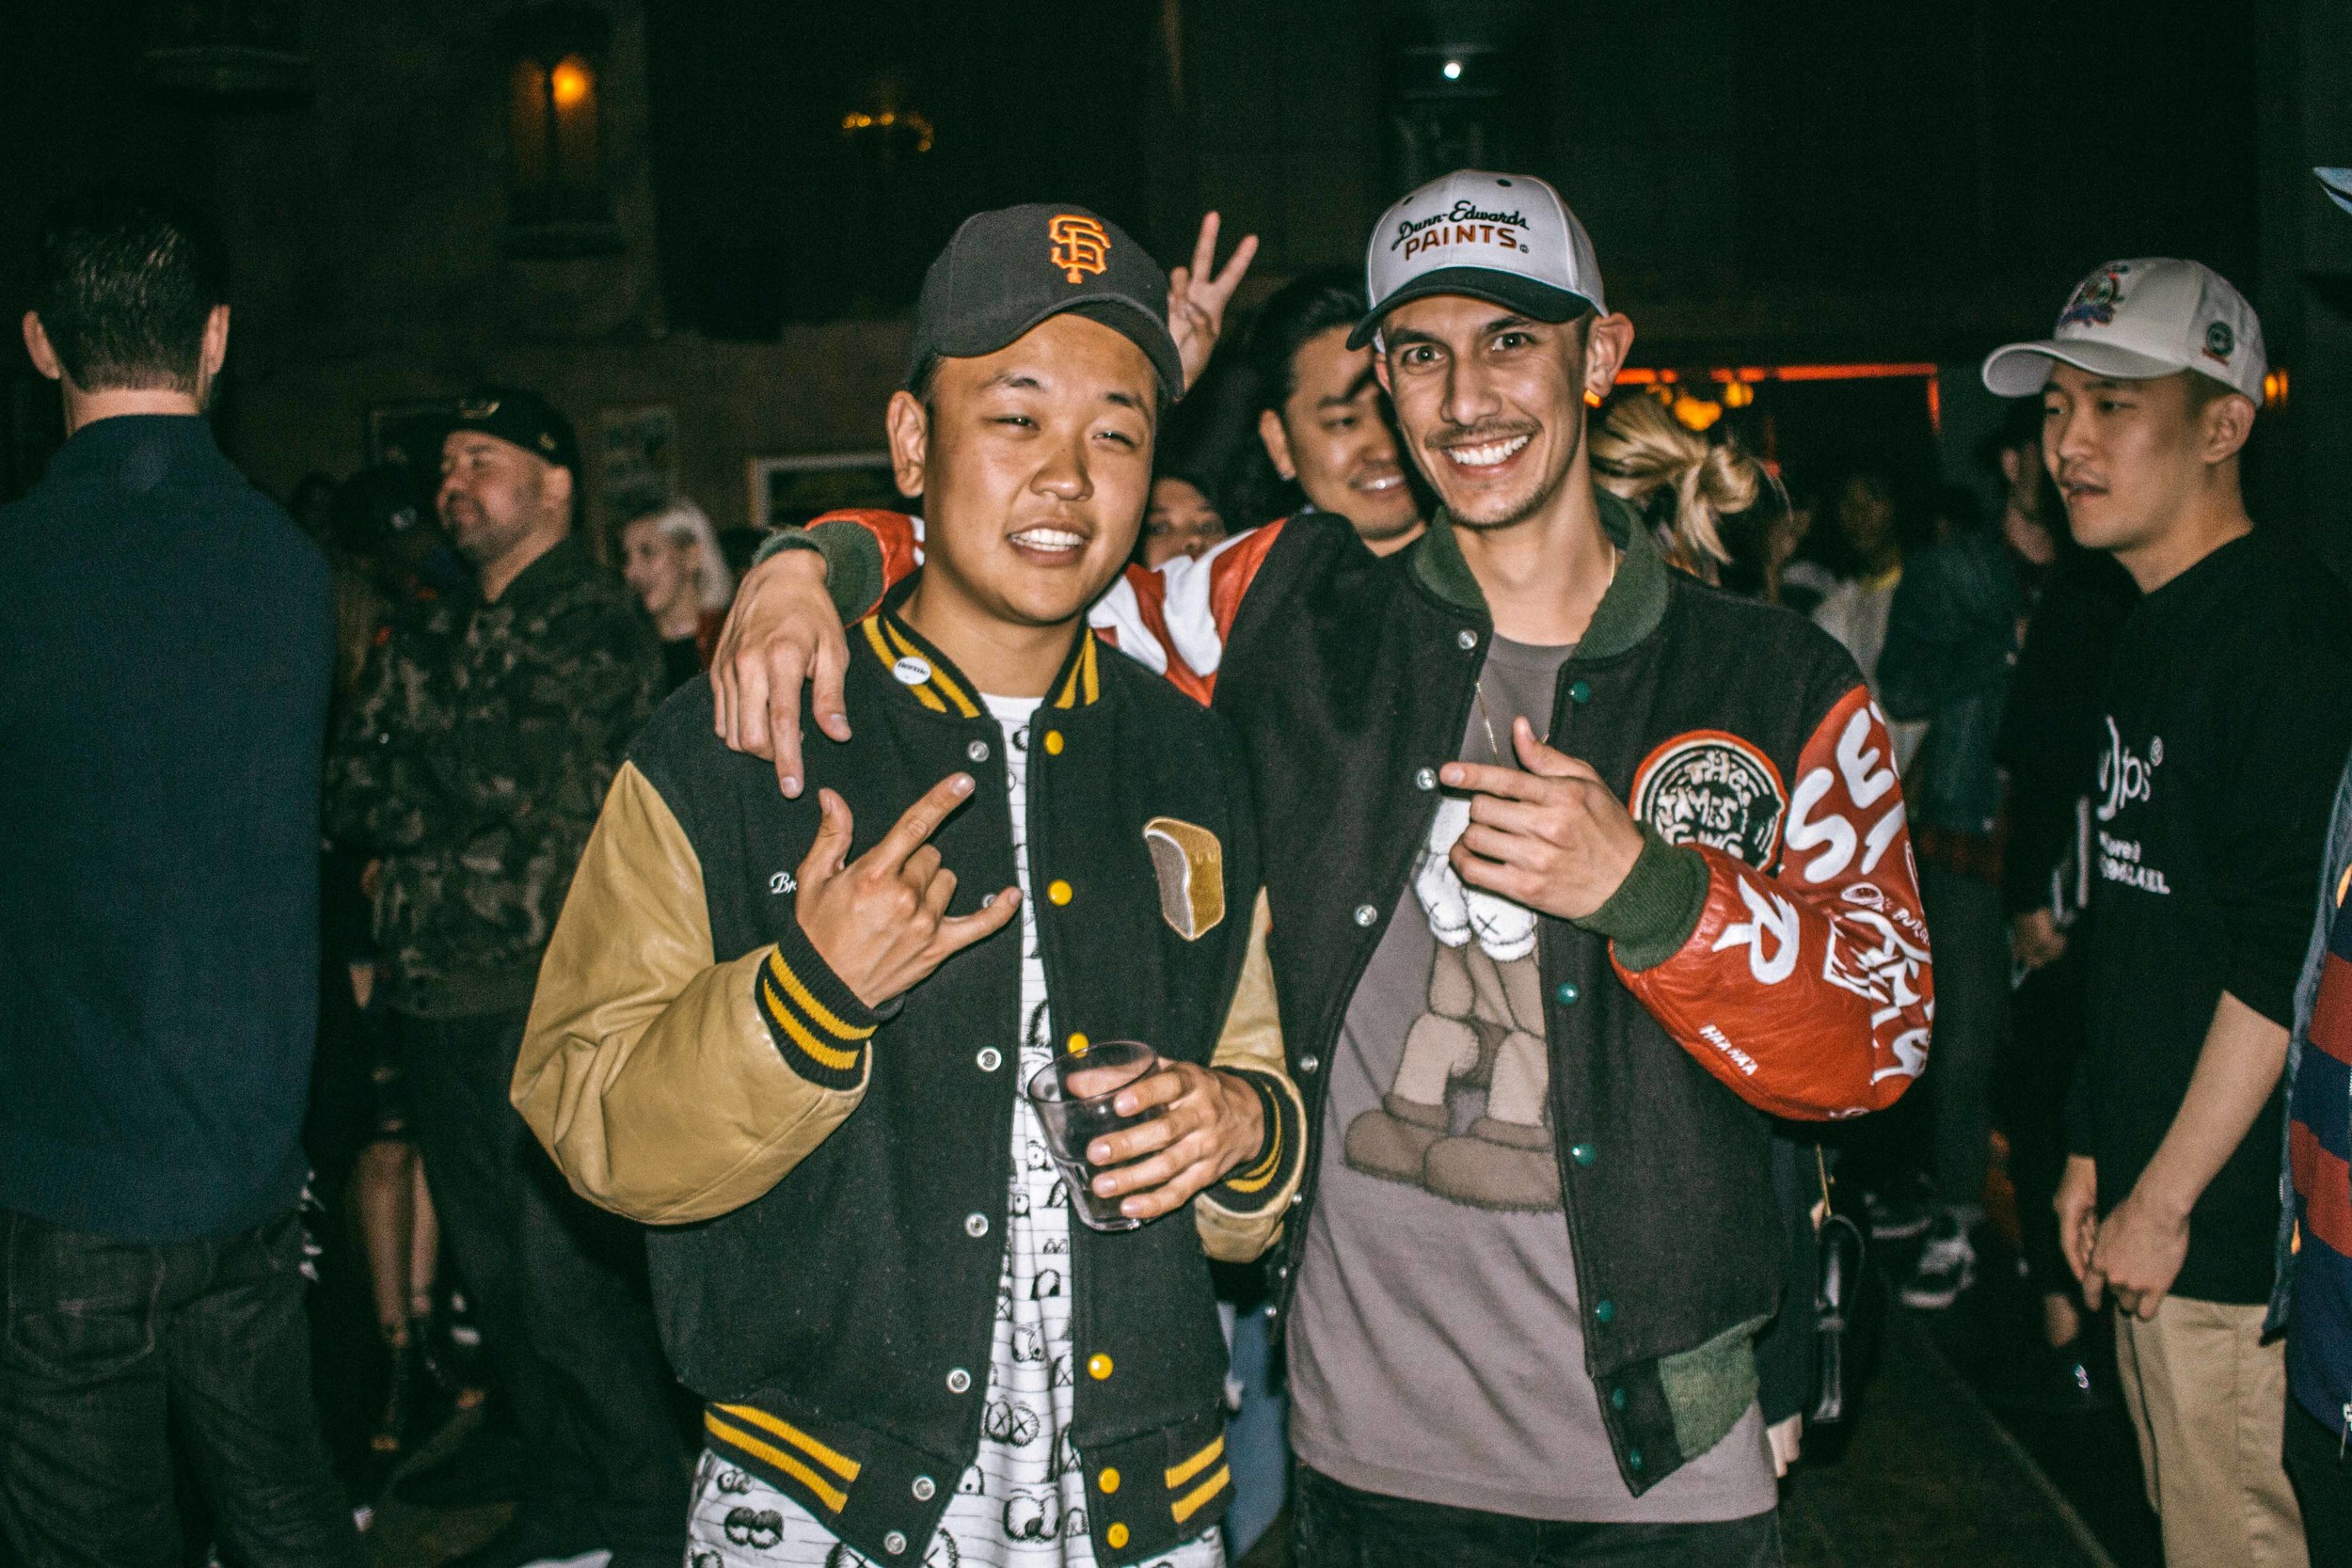  Aaron Lau and Aaron Kai at Be Street ISSUE 31 release at Adults Only in Los Angeles (April 27). / Photo: © Diane Abapo  